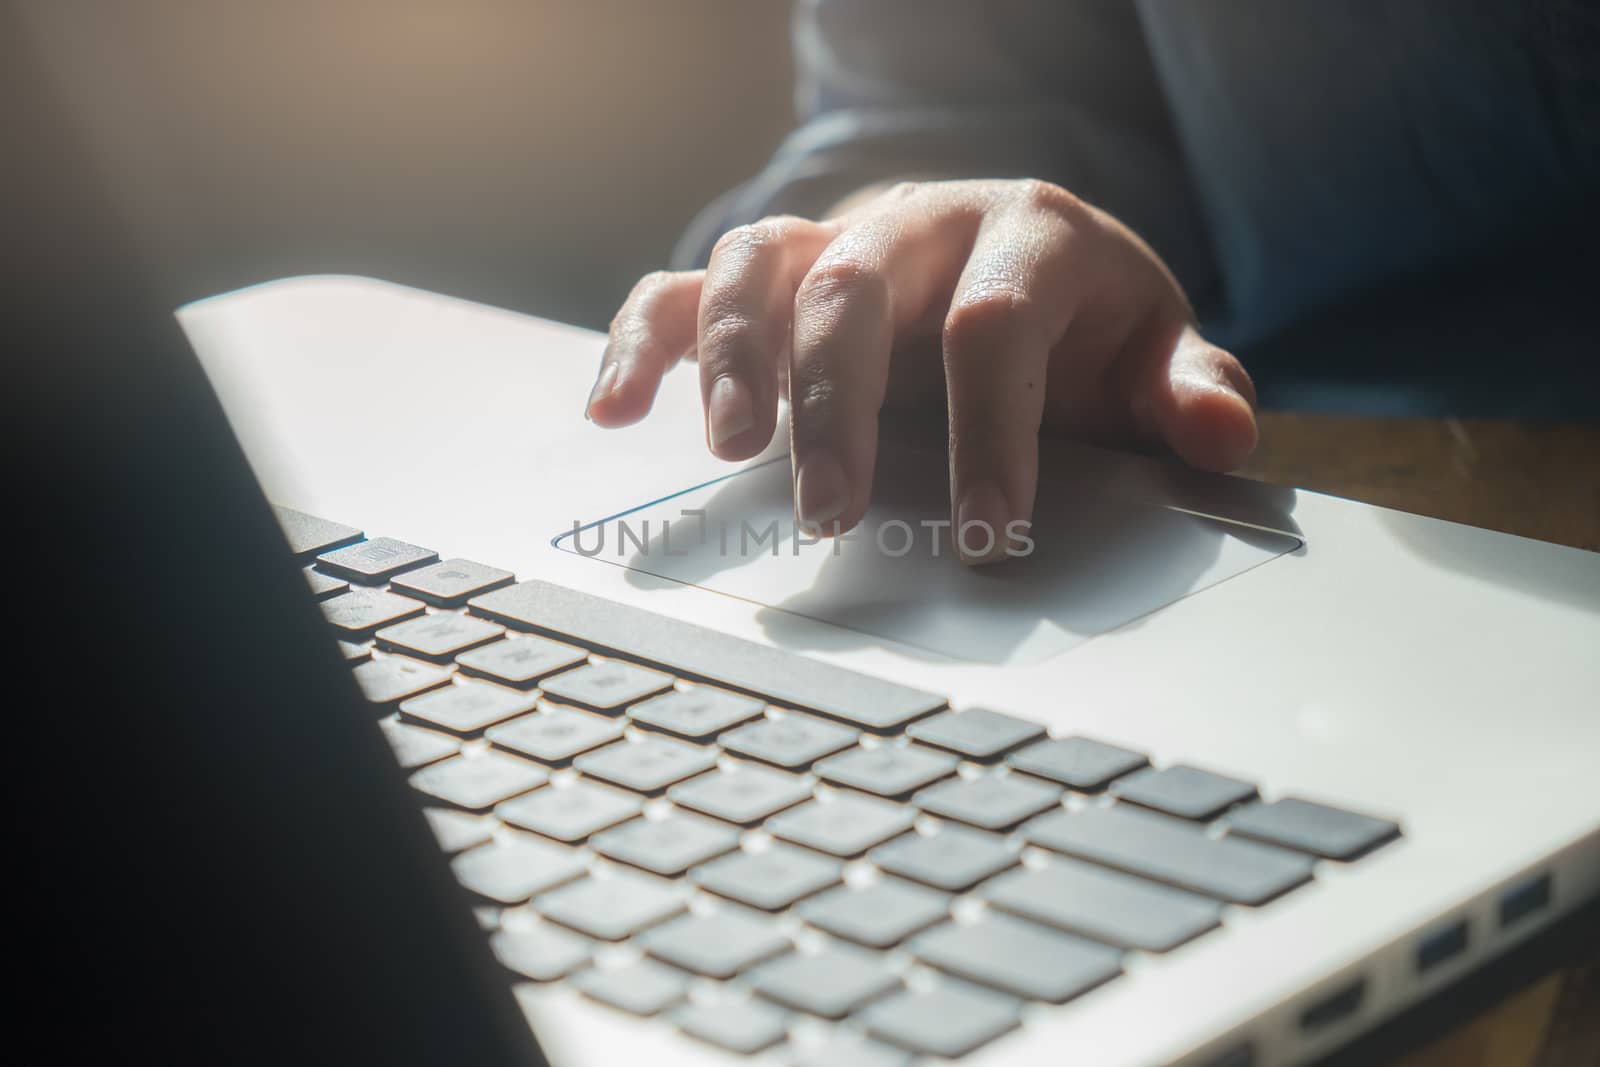 Woman freelance worker touching on laptop touch pad by her hand to select something while working in cafe on weekday morning. Freelance business working lifestyle concept